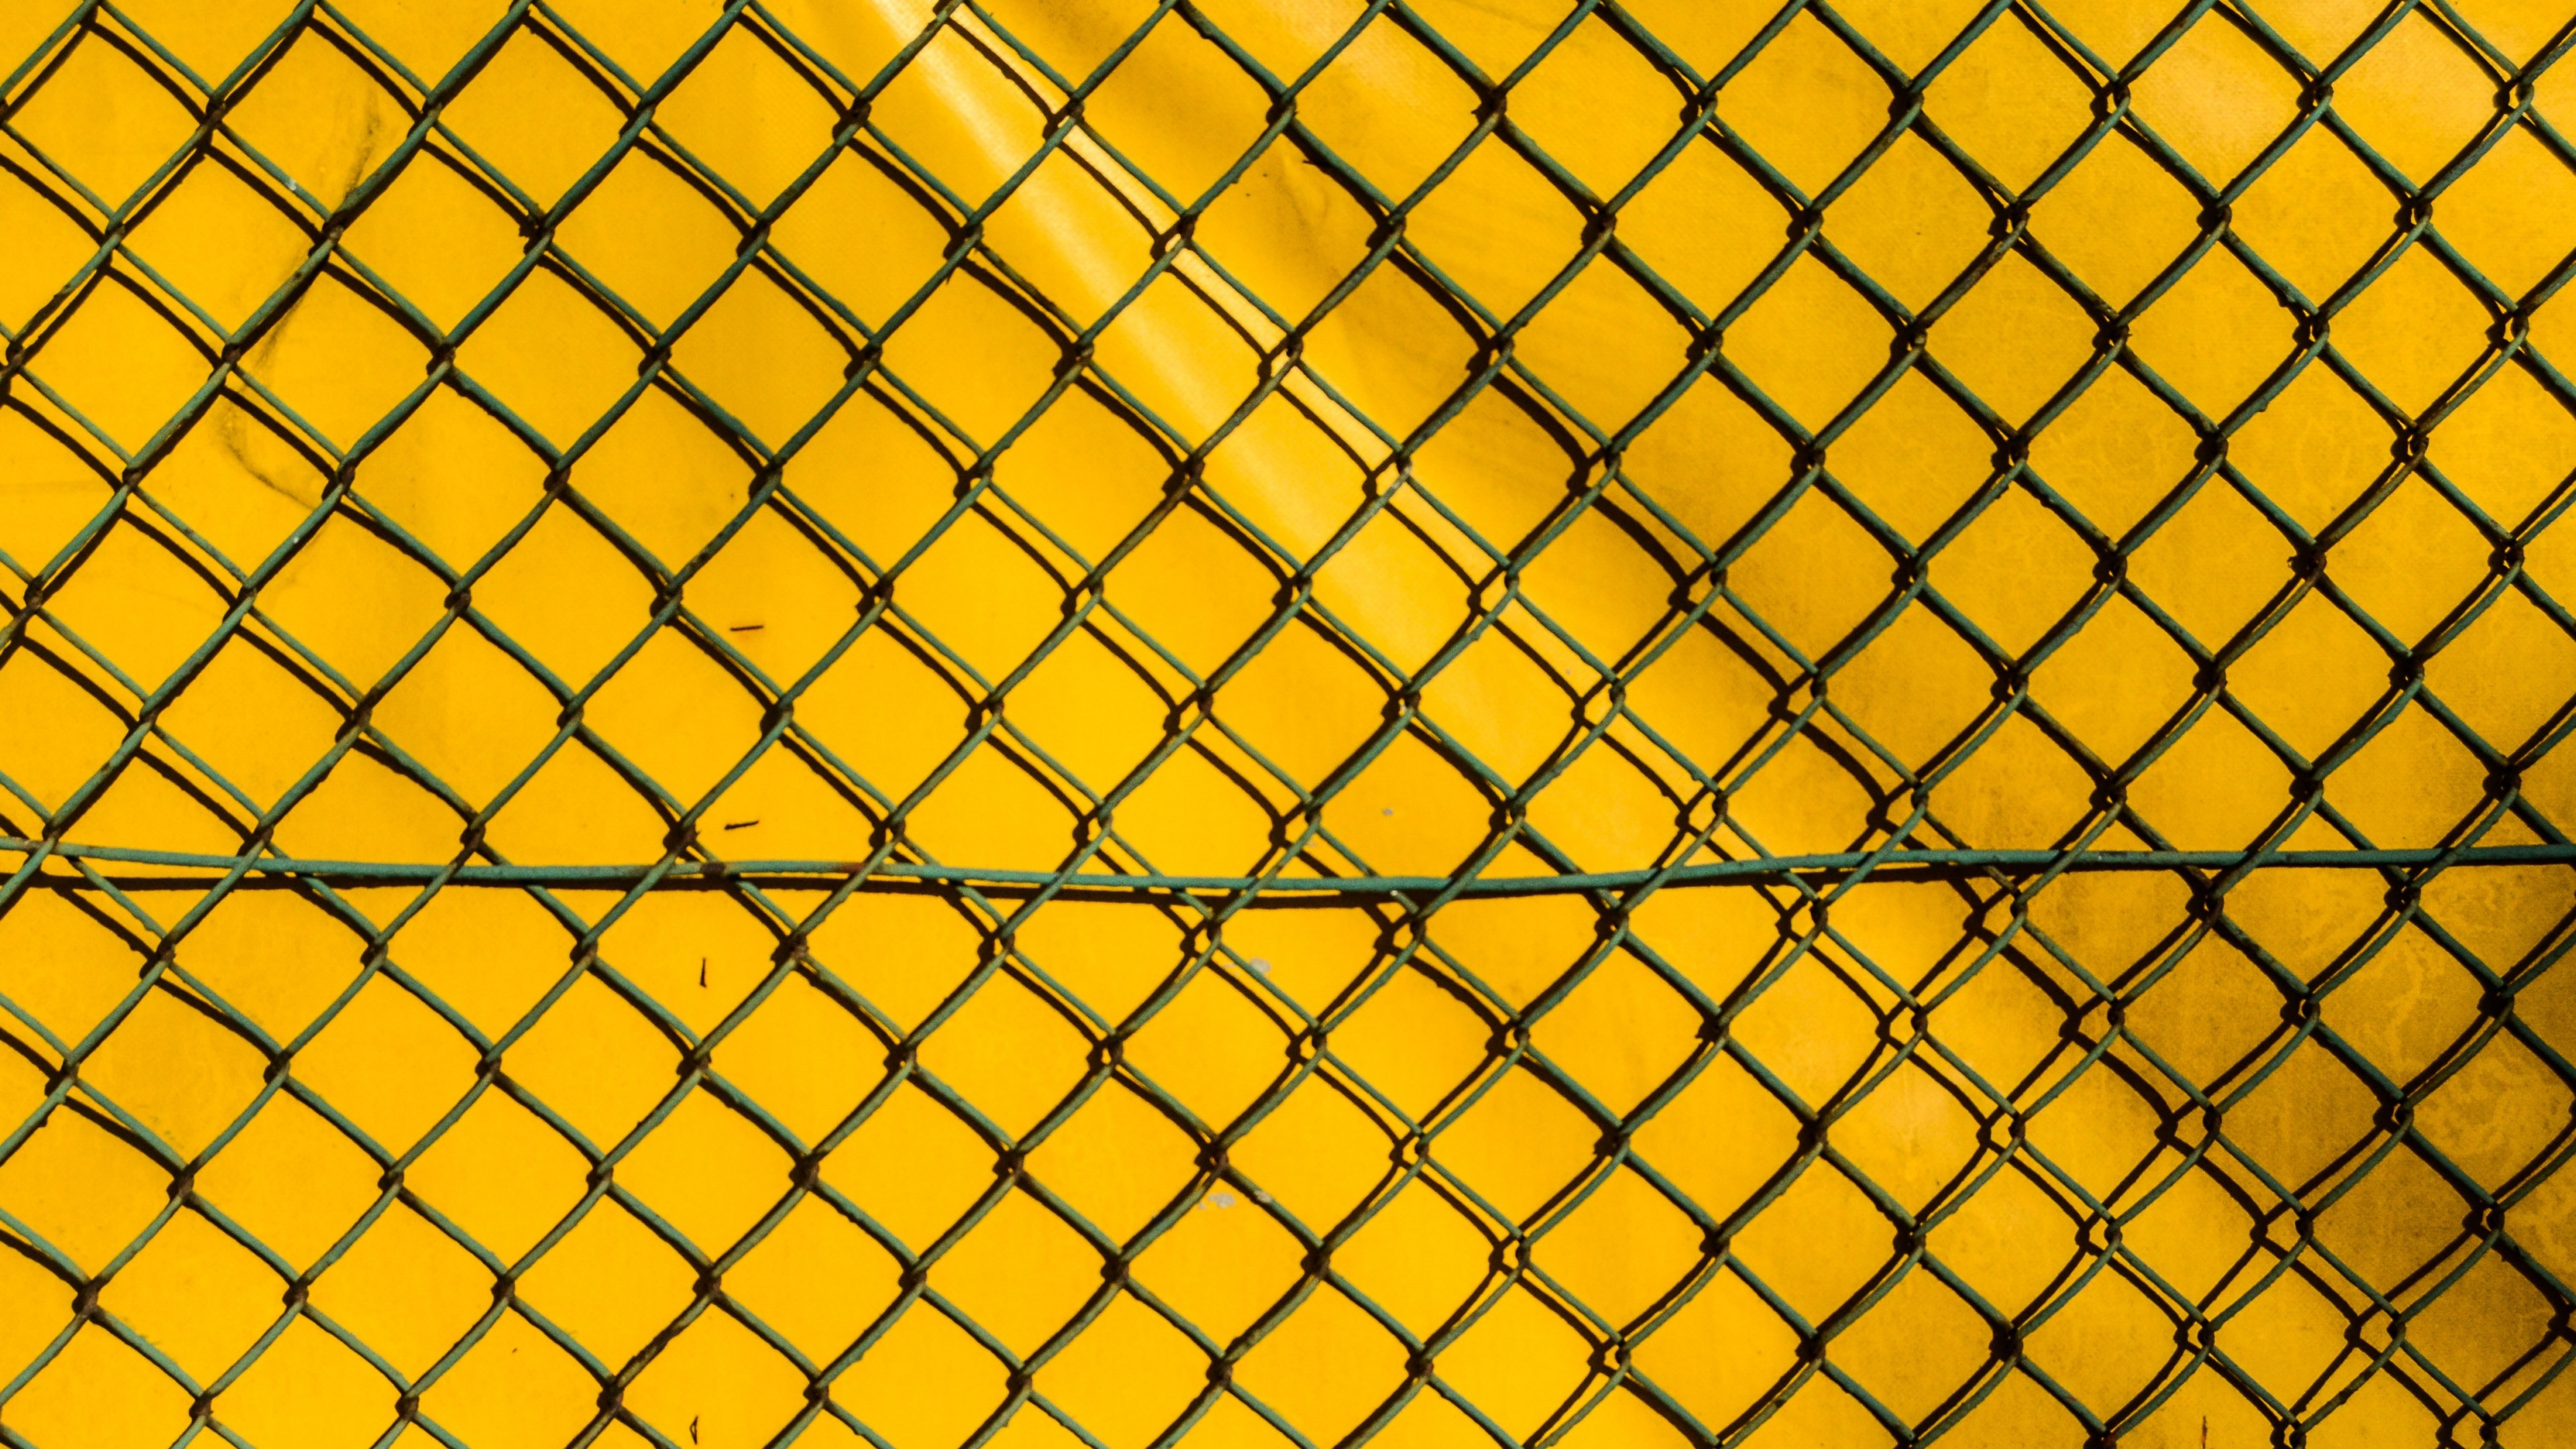 Wallpaper / the fence the grid yellow chain link fence model 4k wallpaper free download